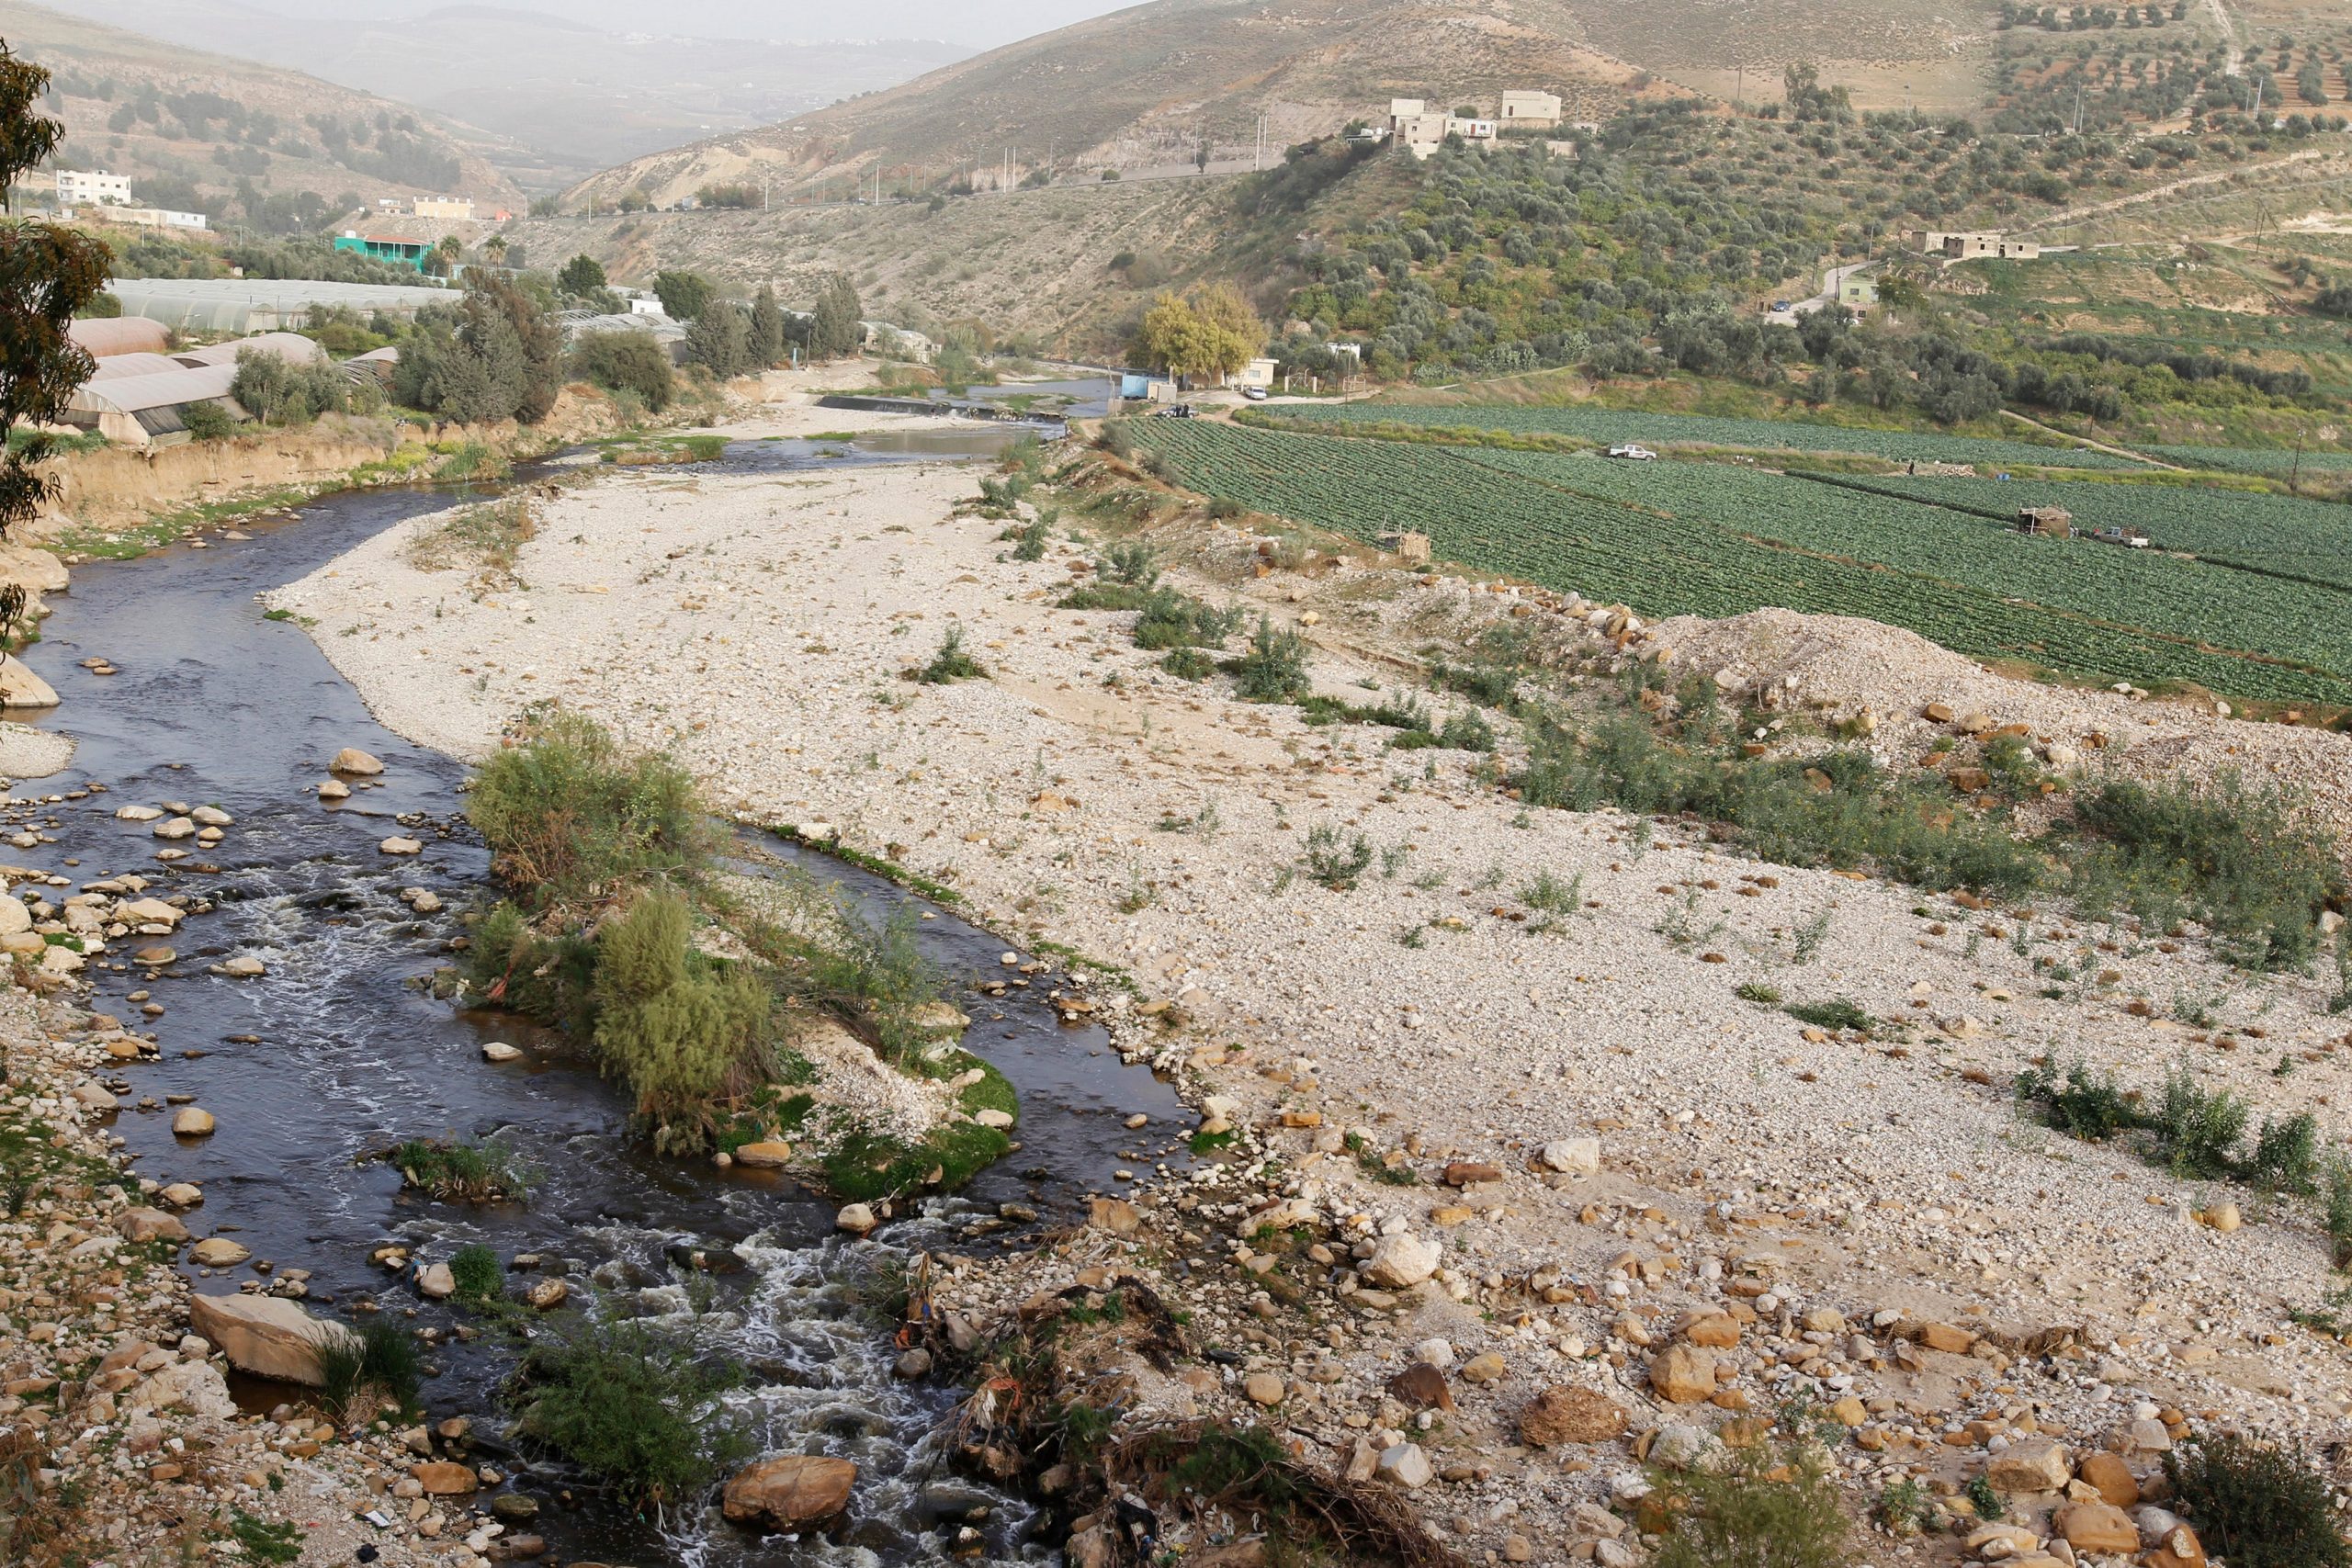 Water scarcity in the Middle East brings Israel and Arab neighbors together